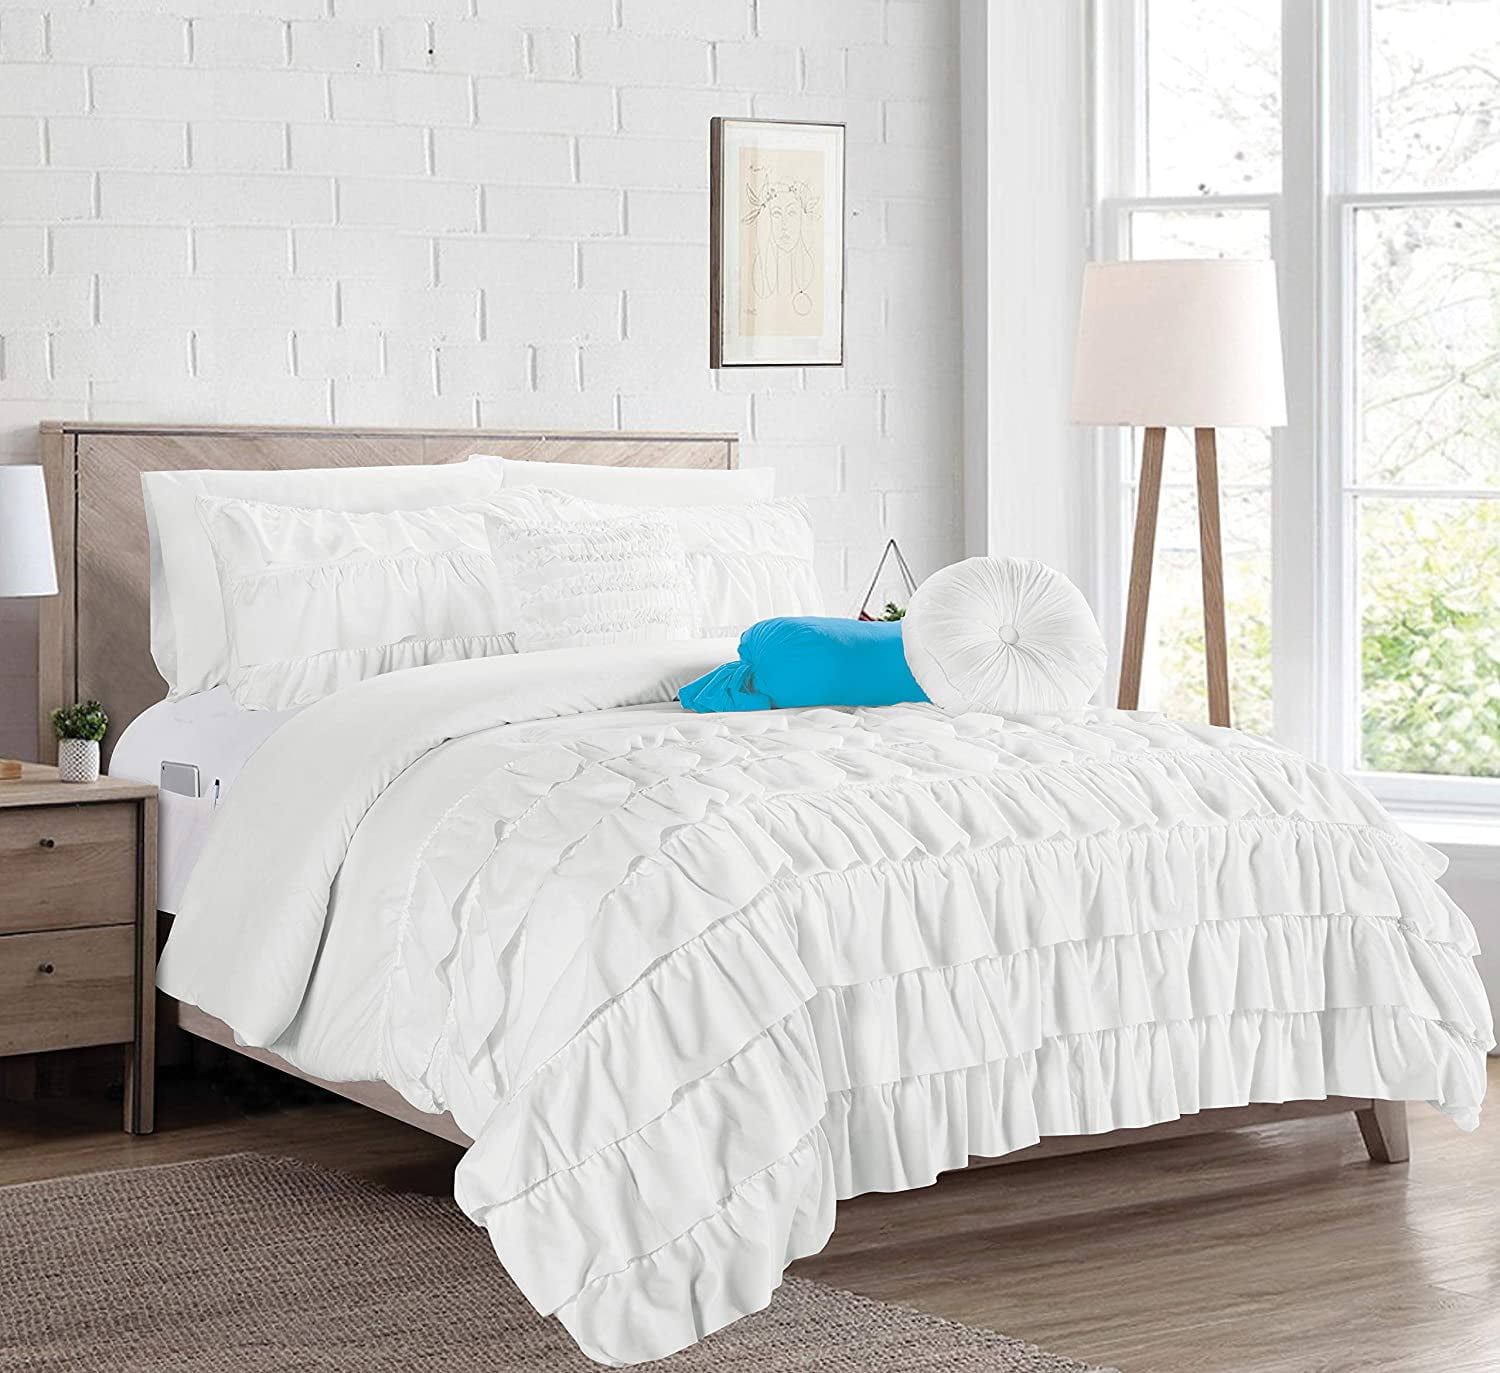 10-Pieces Cindyrealla Multiruffle Comforter Set, Includes Bed